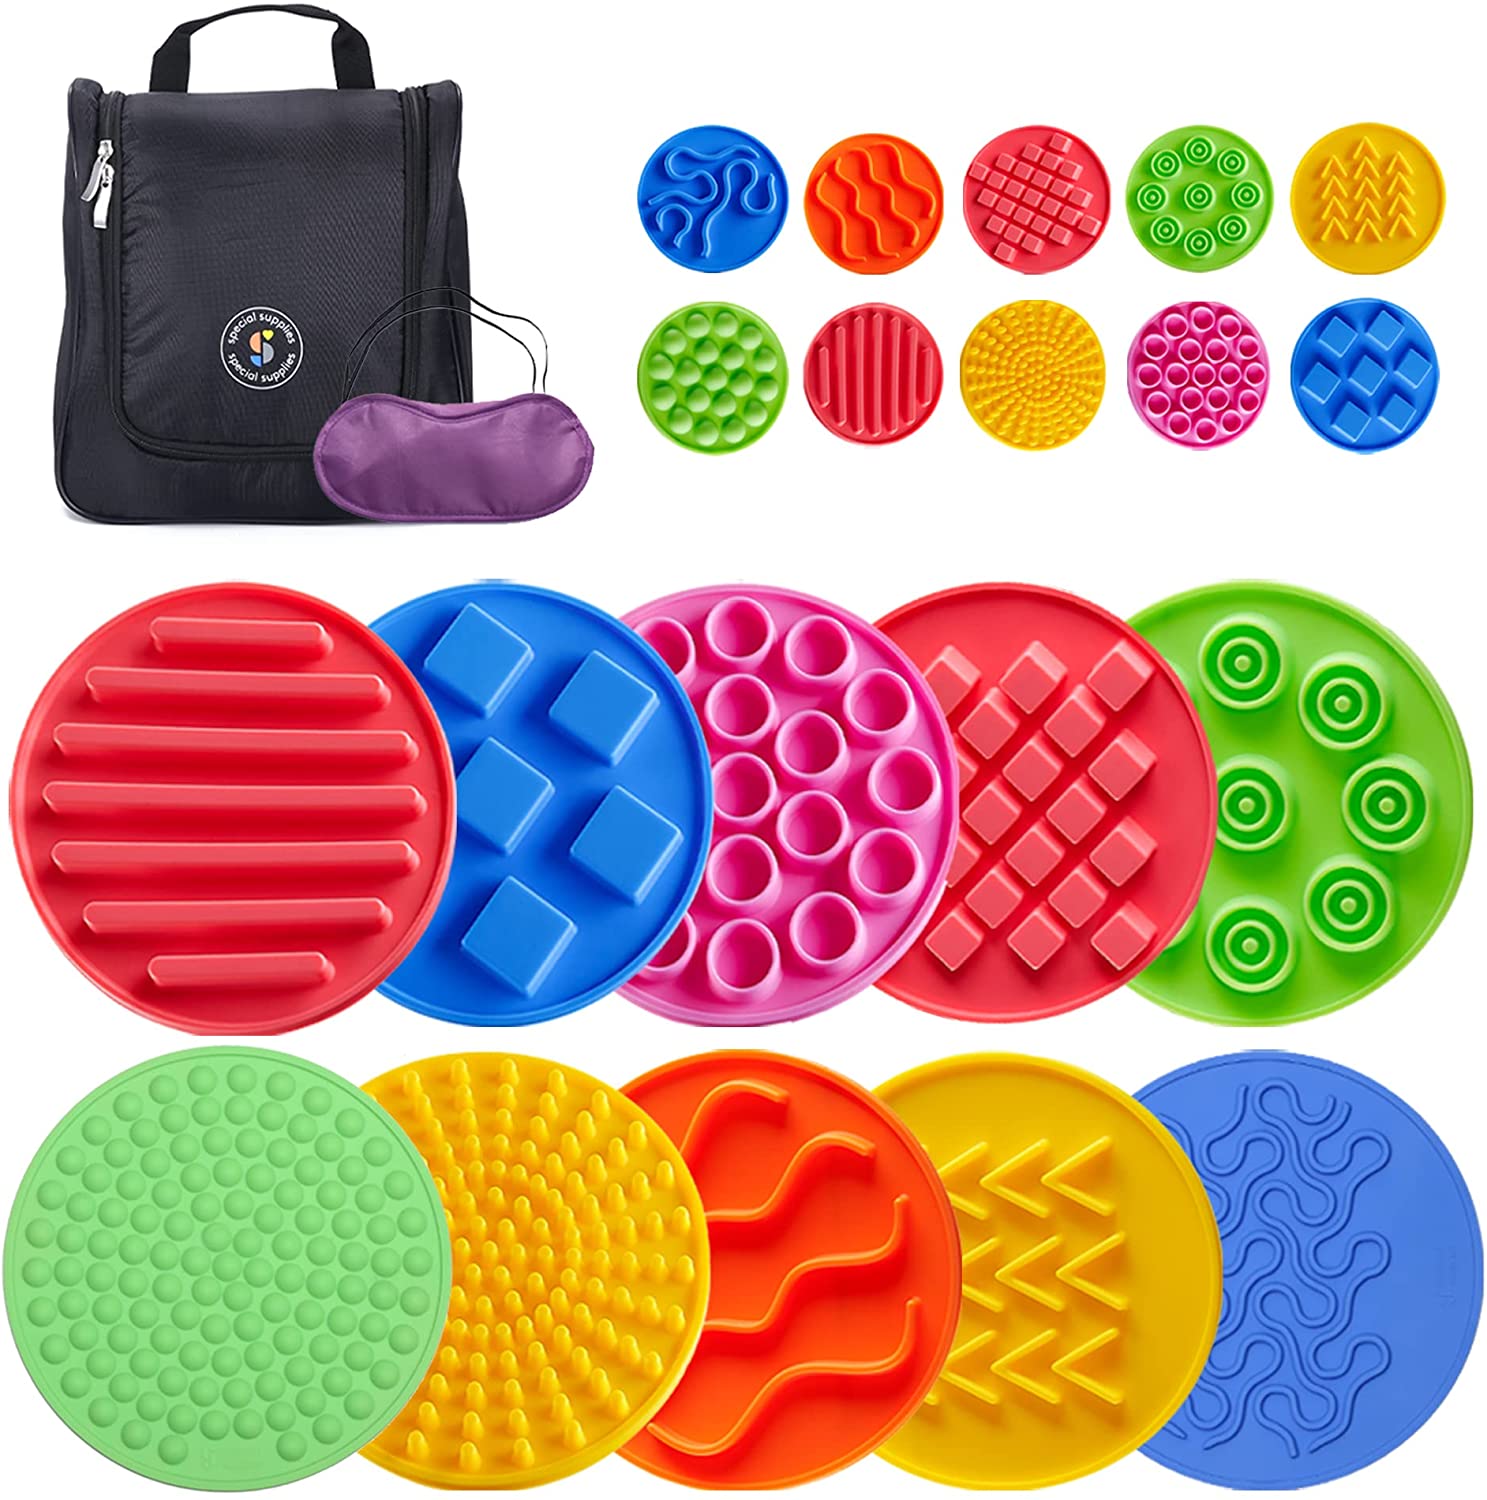 Special Supplies Matching Game Sensory Discs, 10 Sets, Tactile Stimulation for Kids